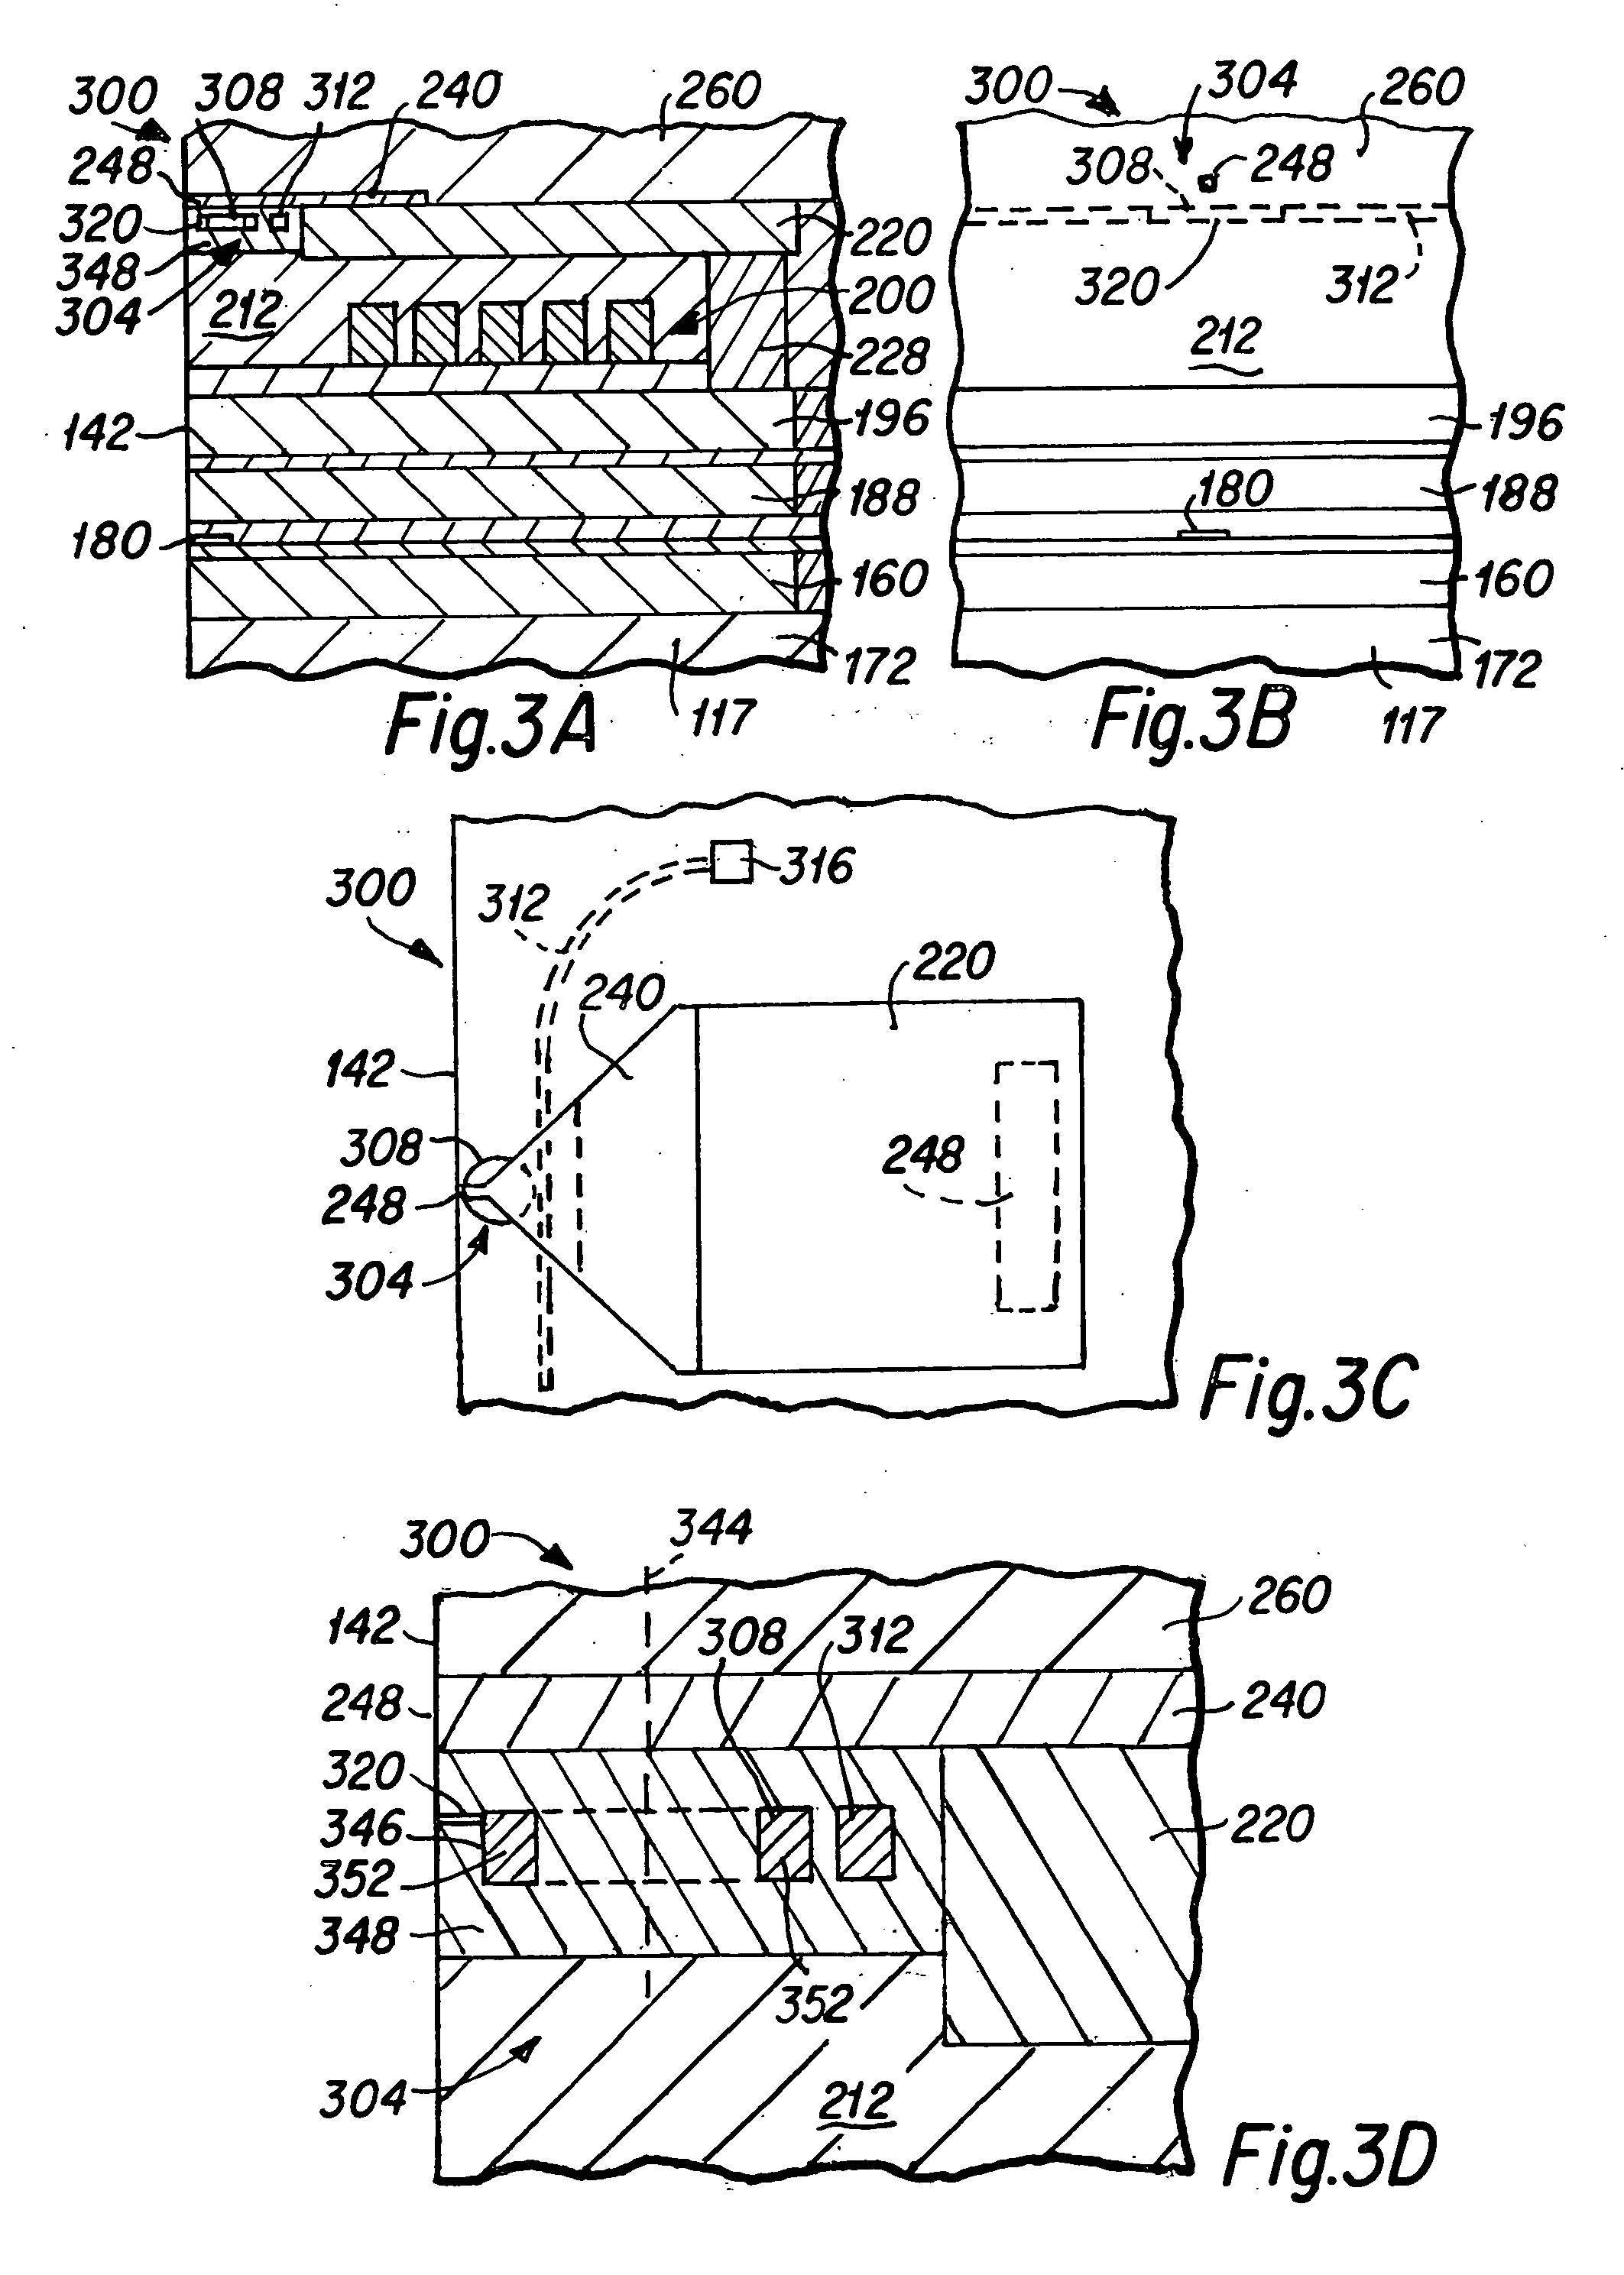 Thermally assisted recording of magnetic media using an optical resonant cavity and nano-pin power delivery device